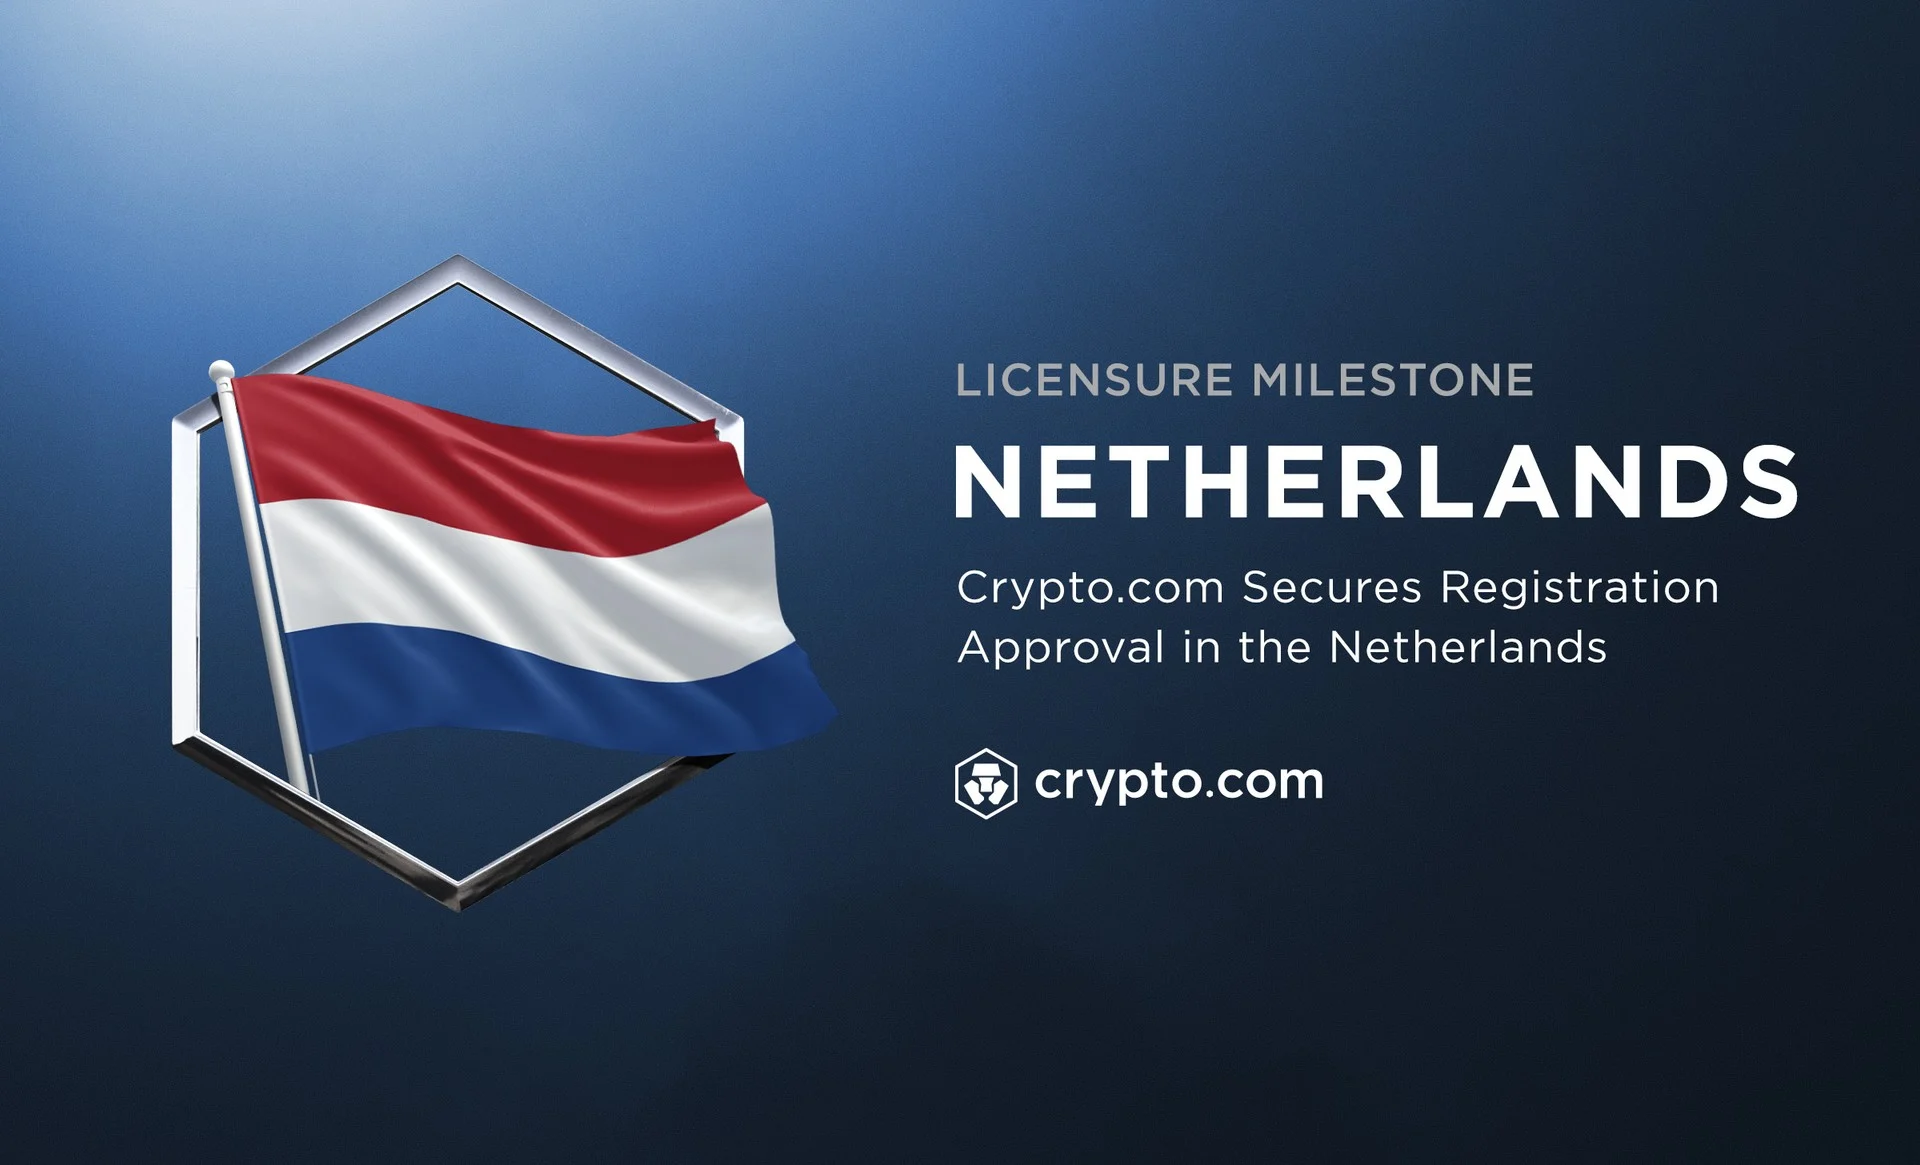 Crypto.com Receives Approval from Dutch Central Bank Expands Services in Netherlands